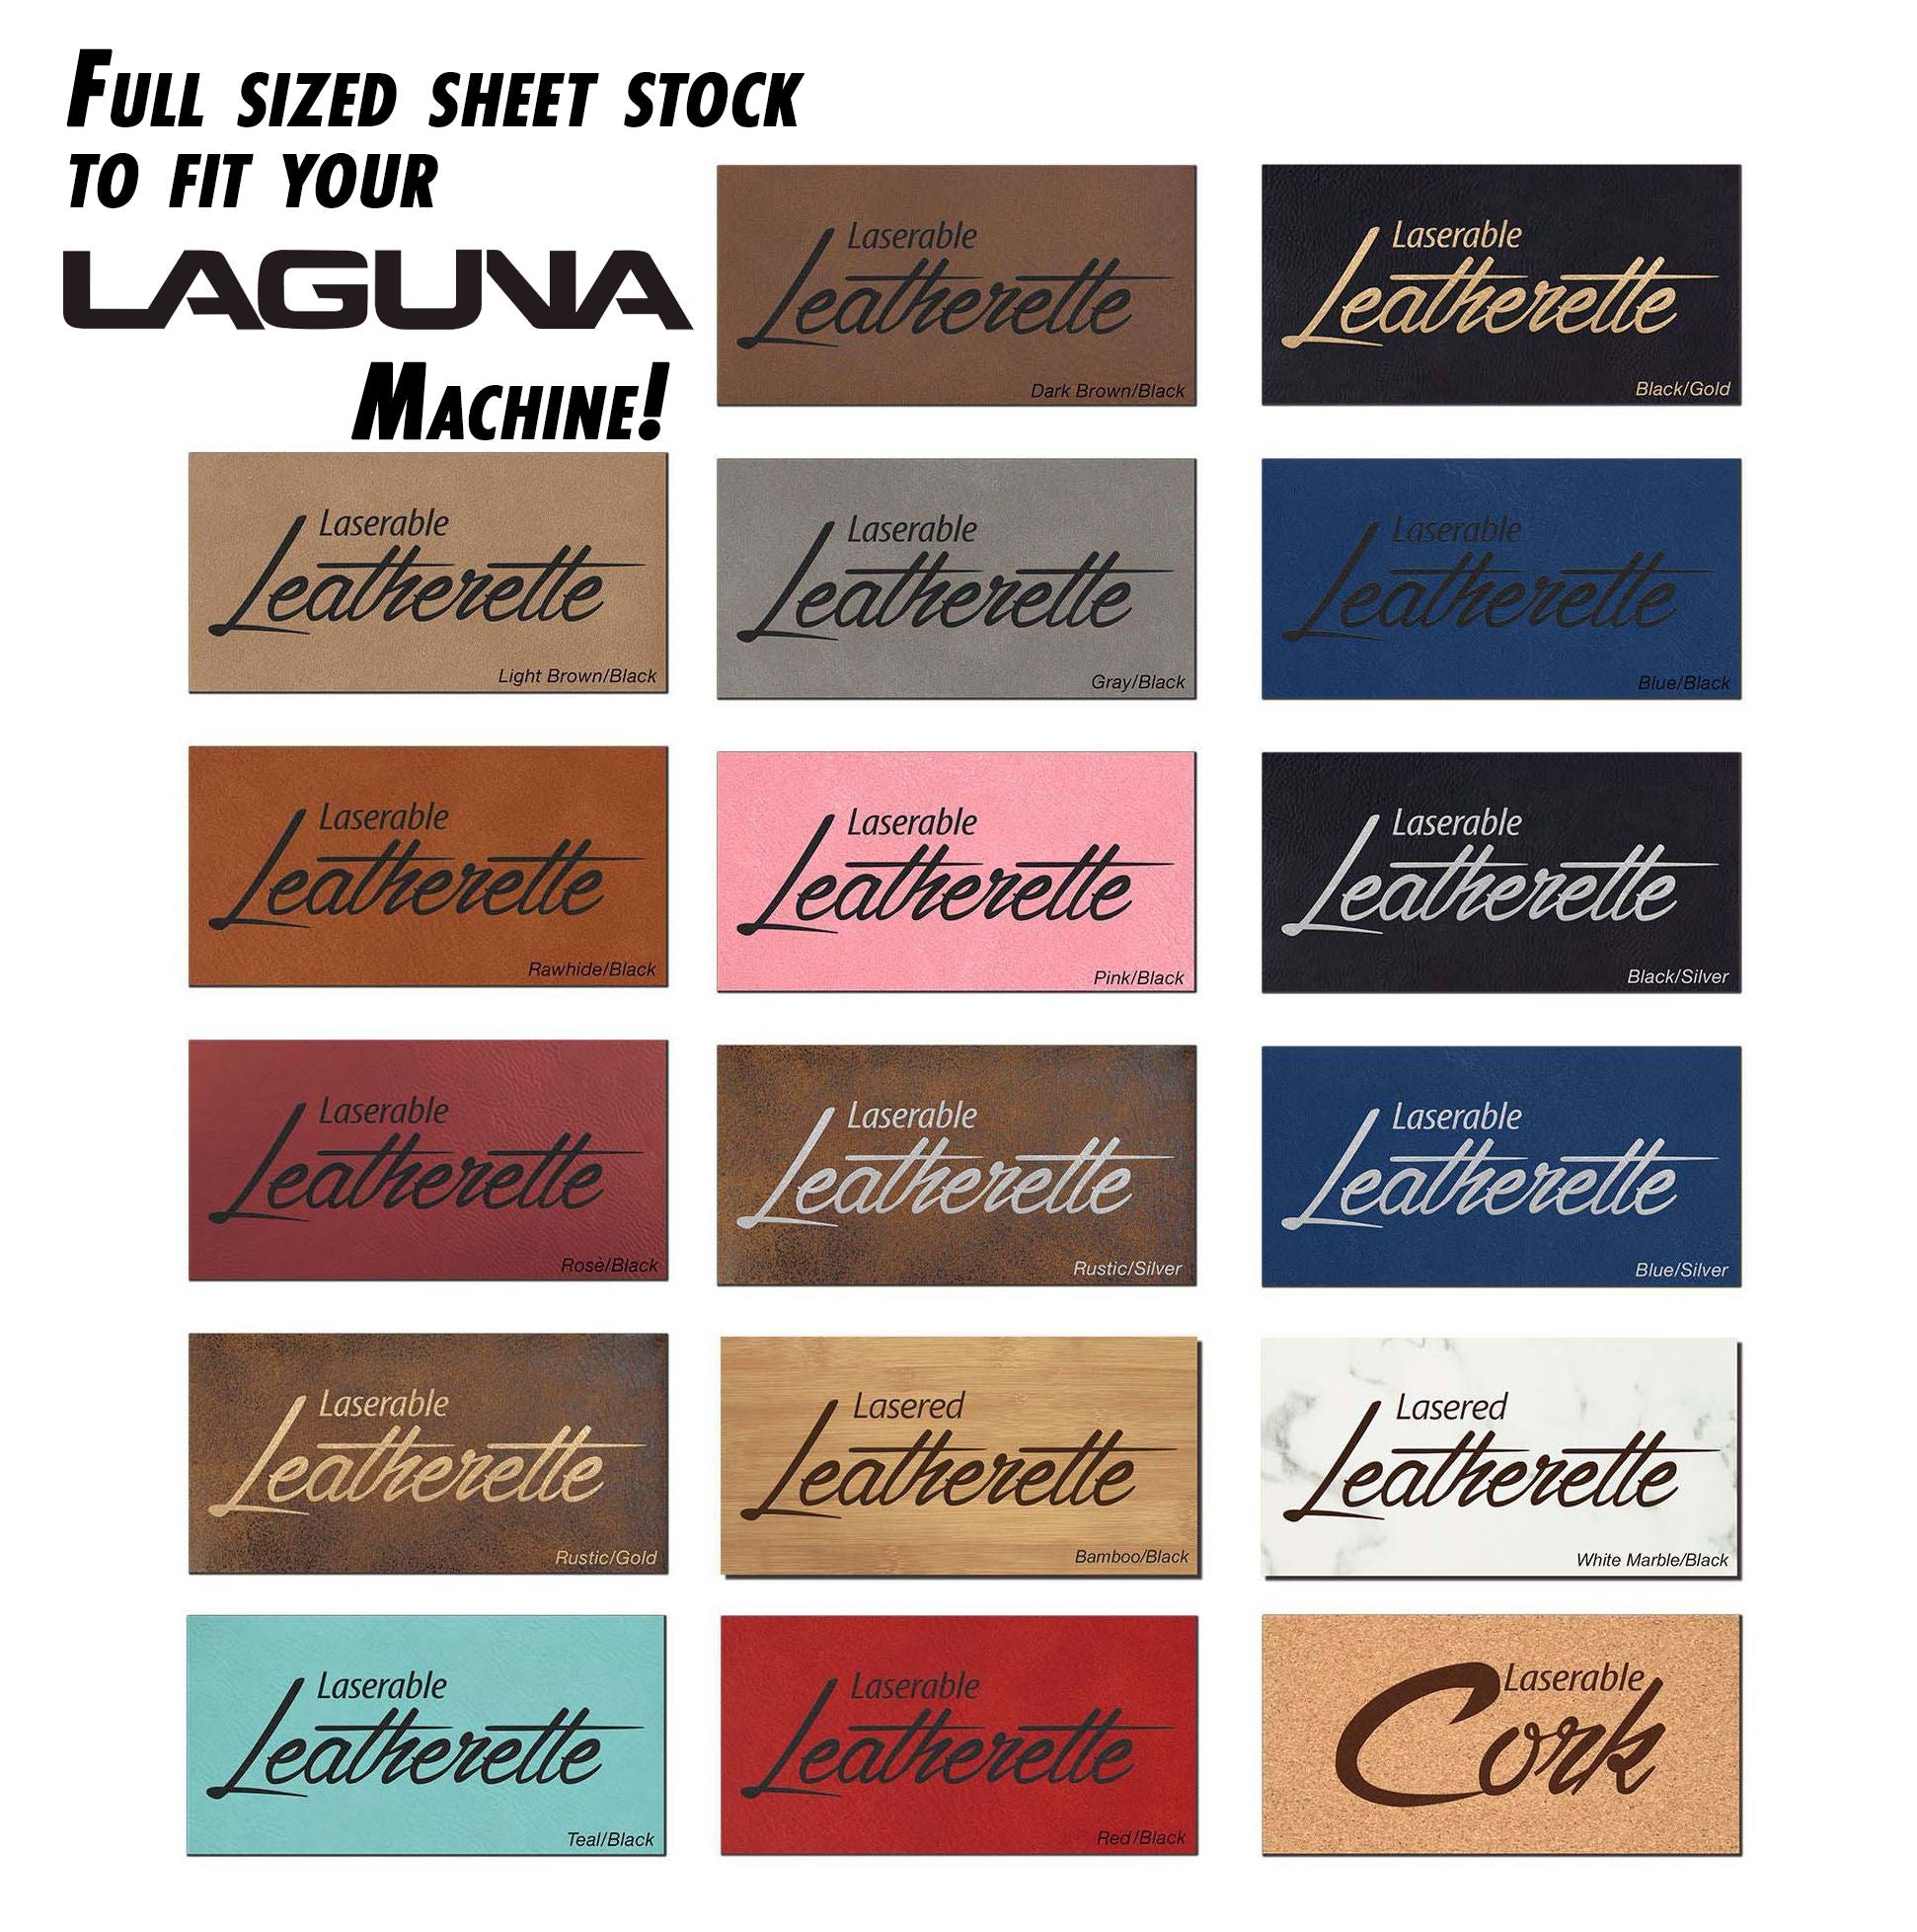 PRE-ORDER! Full Size Laserable Leatherette Sheet Stock, Laguna Laser Engravers (Available Jan. 2022) Engraving Supplies Craftworks NW 